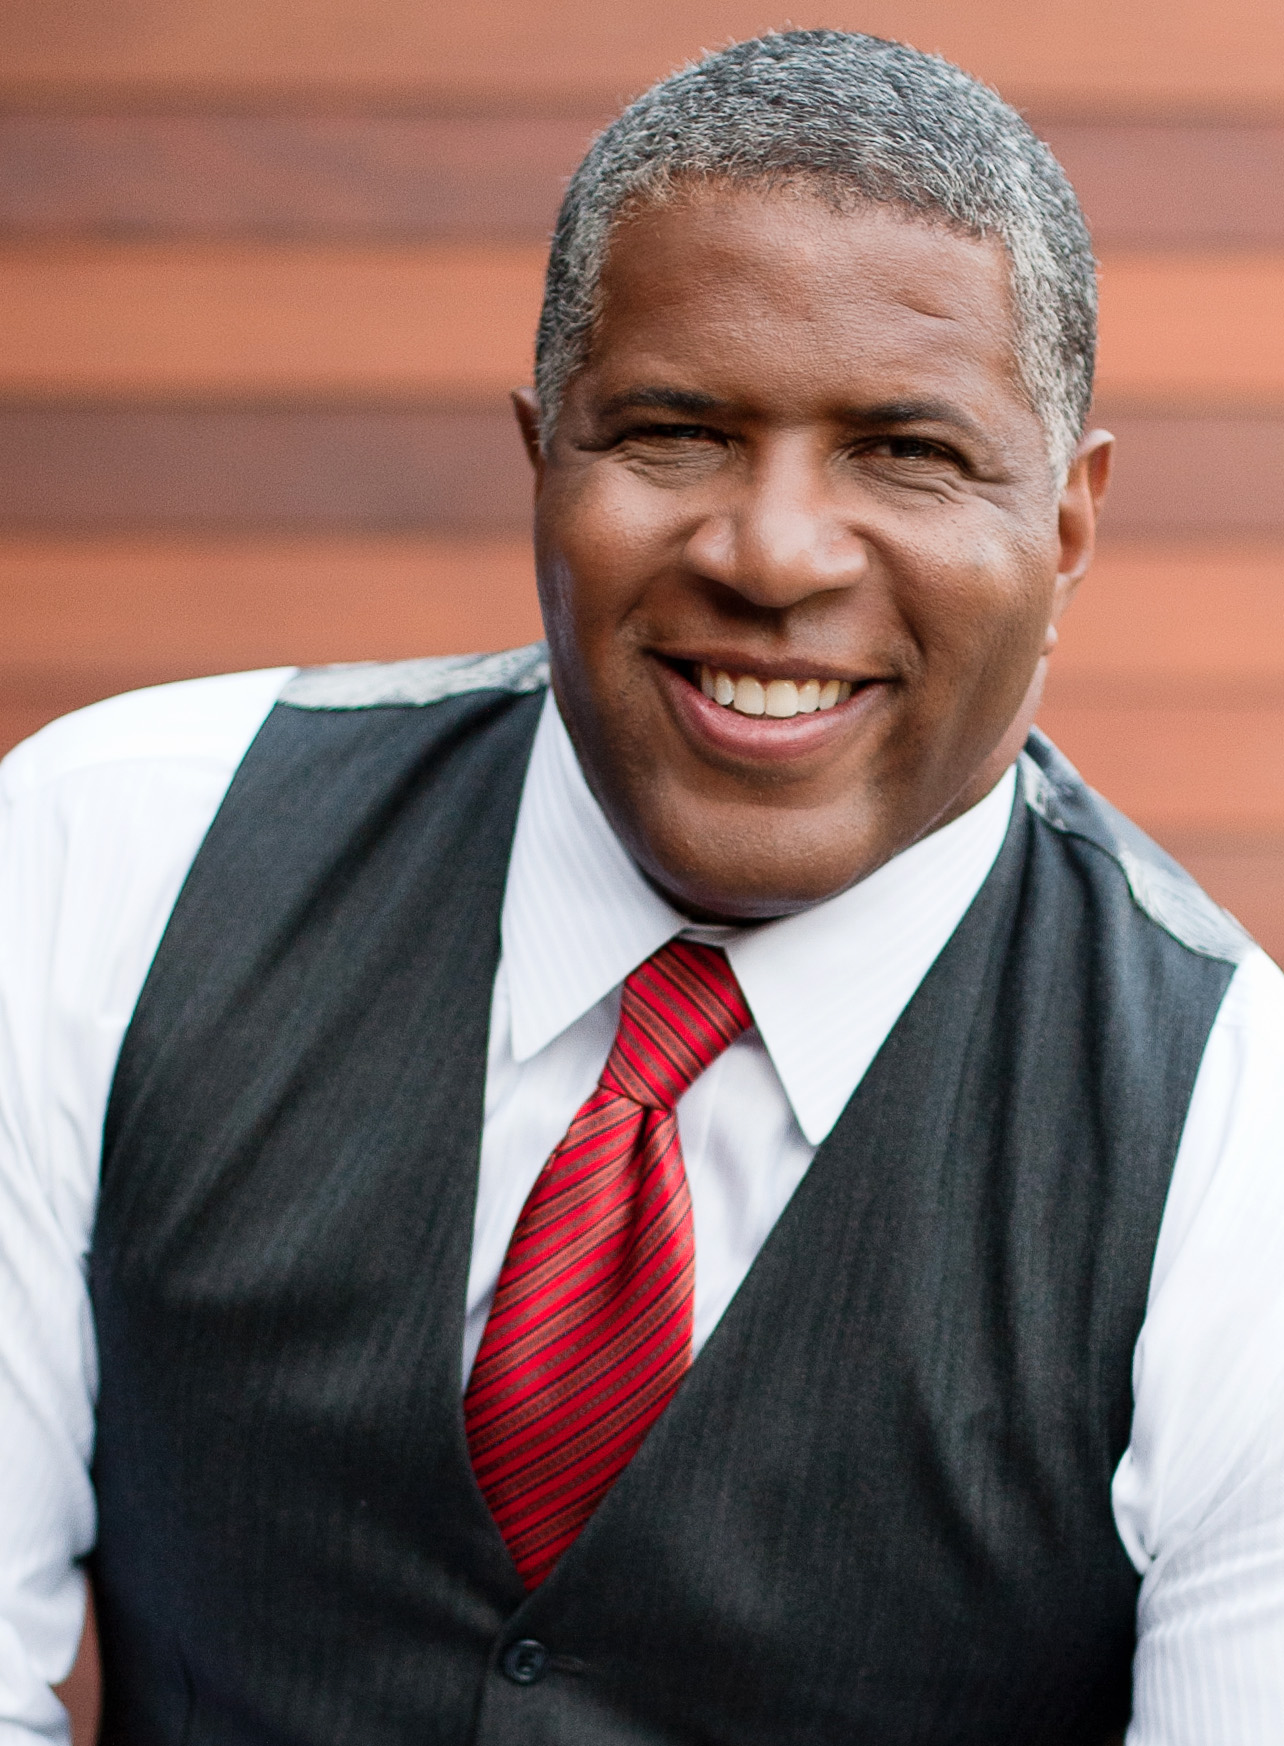 A headshot image of Robert F. Smith of Vista Equity Partners.